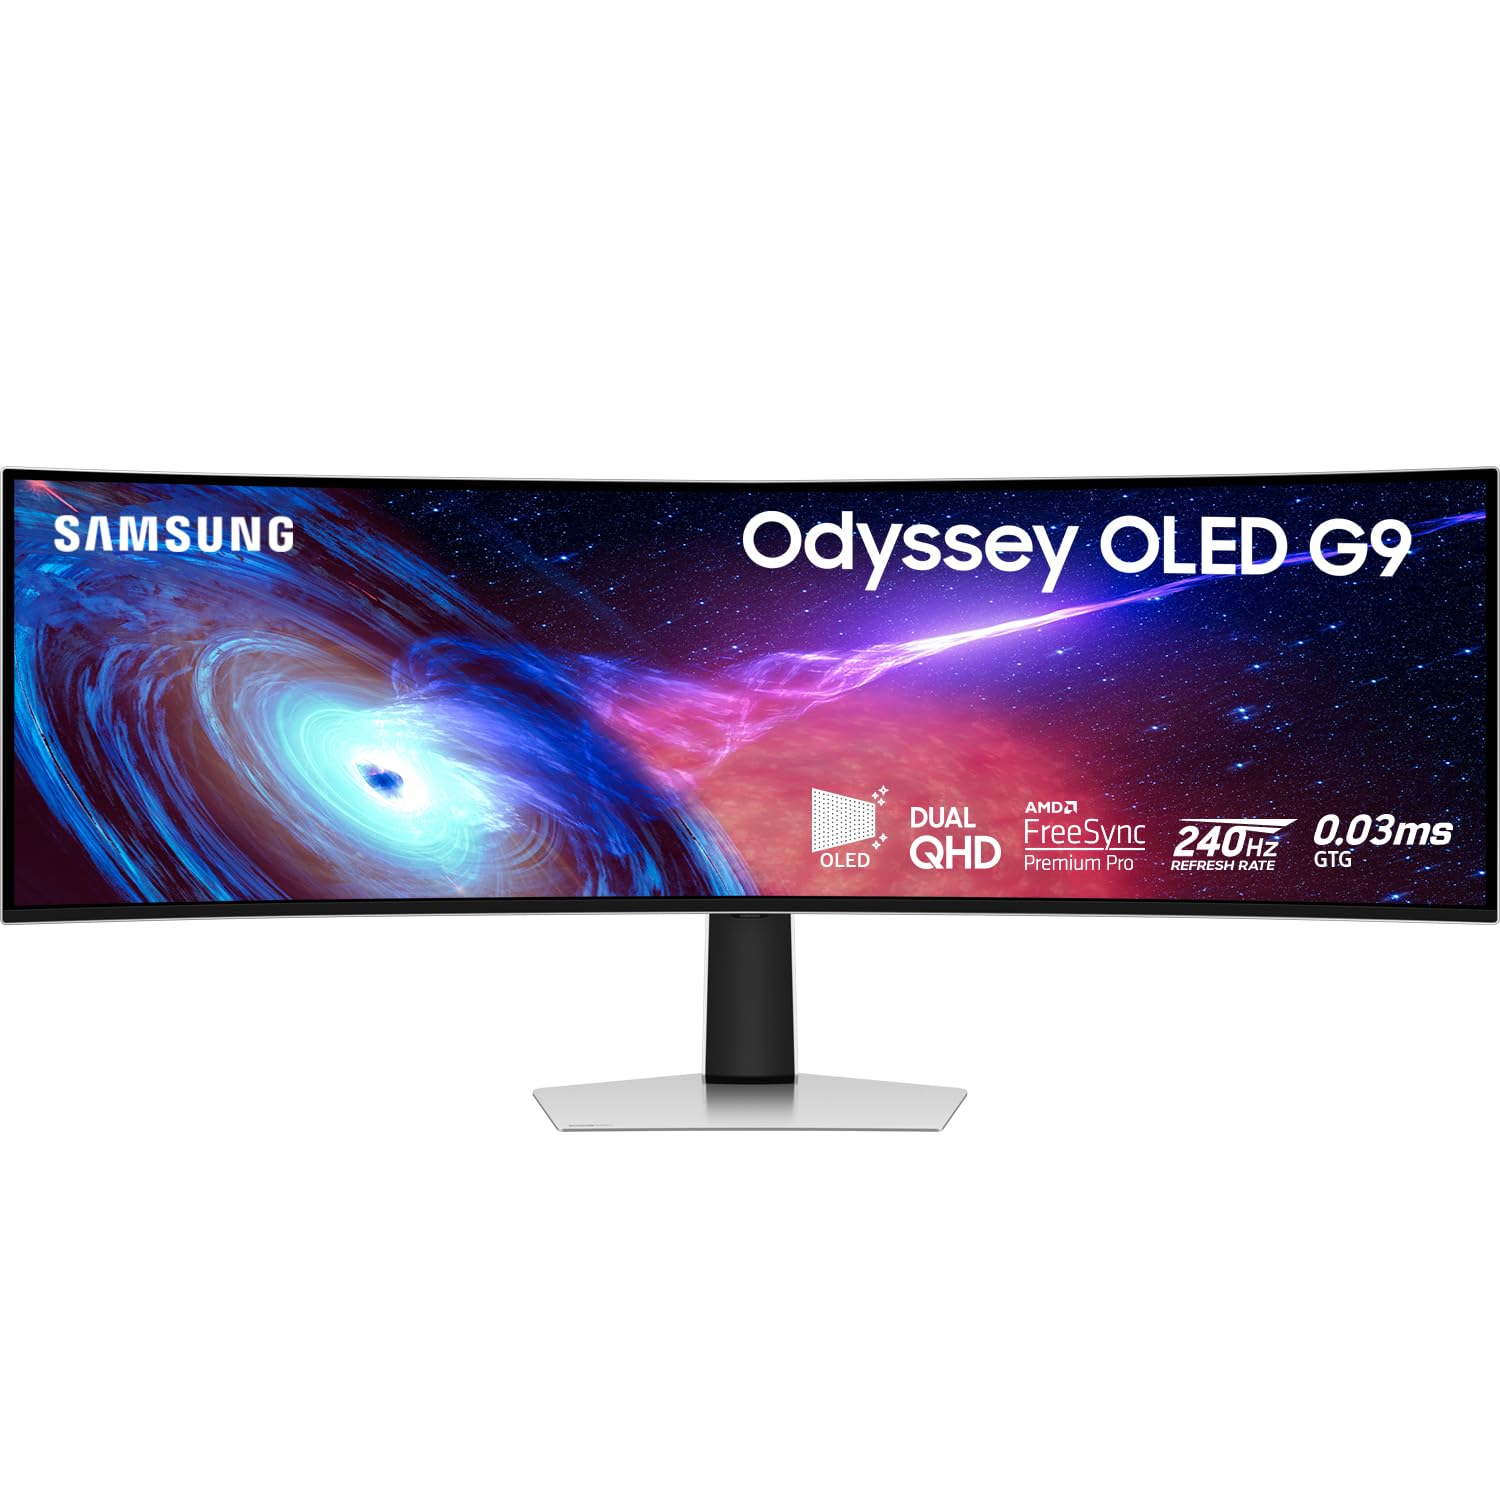 49" Samsung Odyssey G9 G93SC DQHD OLED 240Hz Curved Gaming Monitor + Free Shipping - Amazon $1099.99